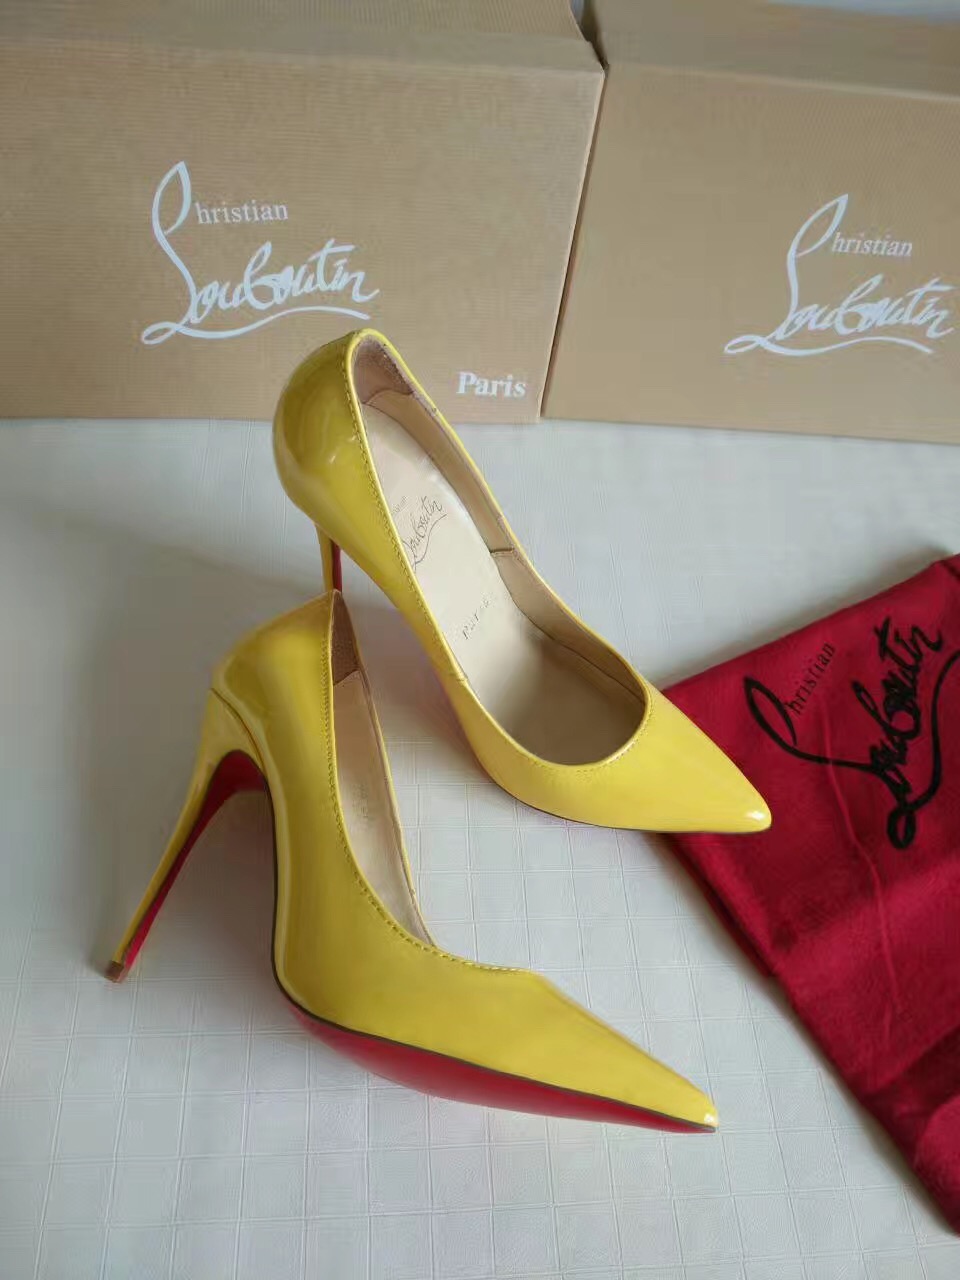 Christian Louboutin CL heels yellow 11cm sandals shoes